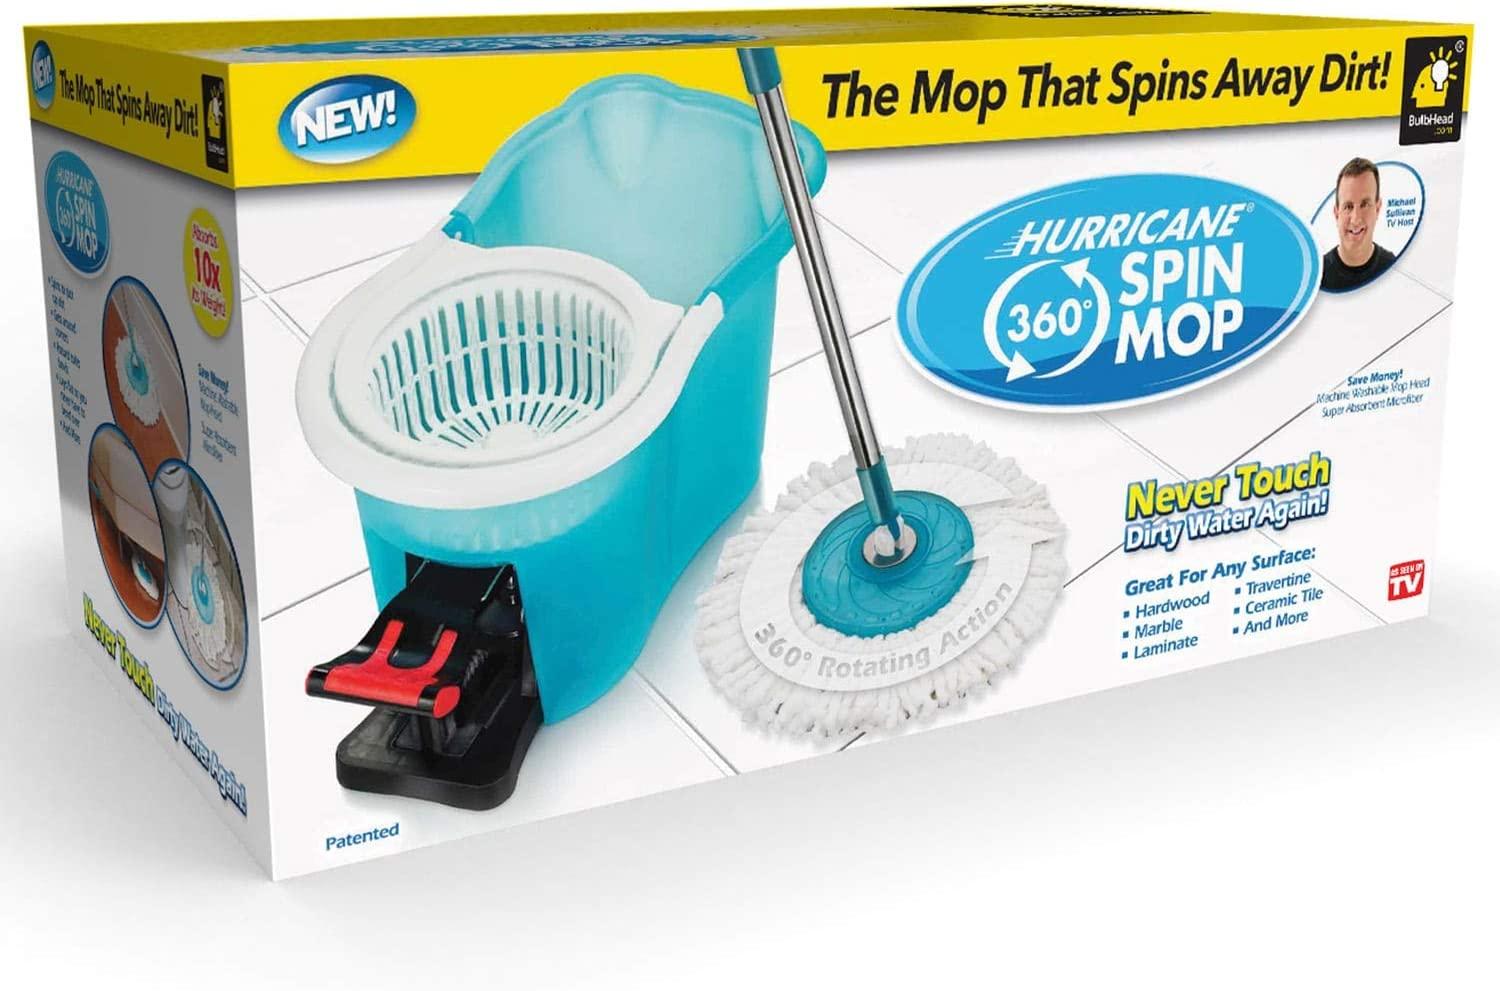 Door merk kraan Hurricane Spin Mop As Seen On TV Mop & Bucket Cleaning System by BulbHead,  Spin Away Germy, Dirty Water - Super-Absorbent Microfiber Mop Head Holds  10X Weight, Reaches Anywhere - Pole Lays